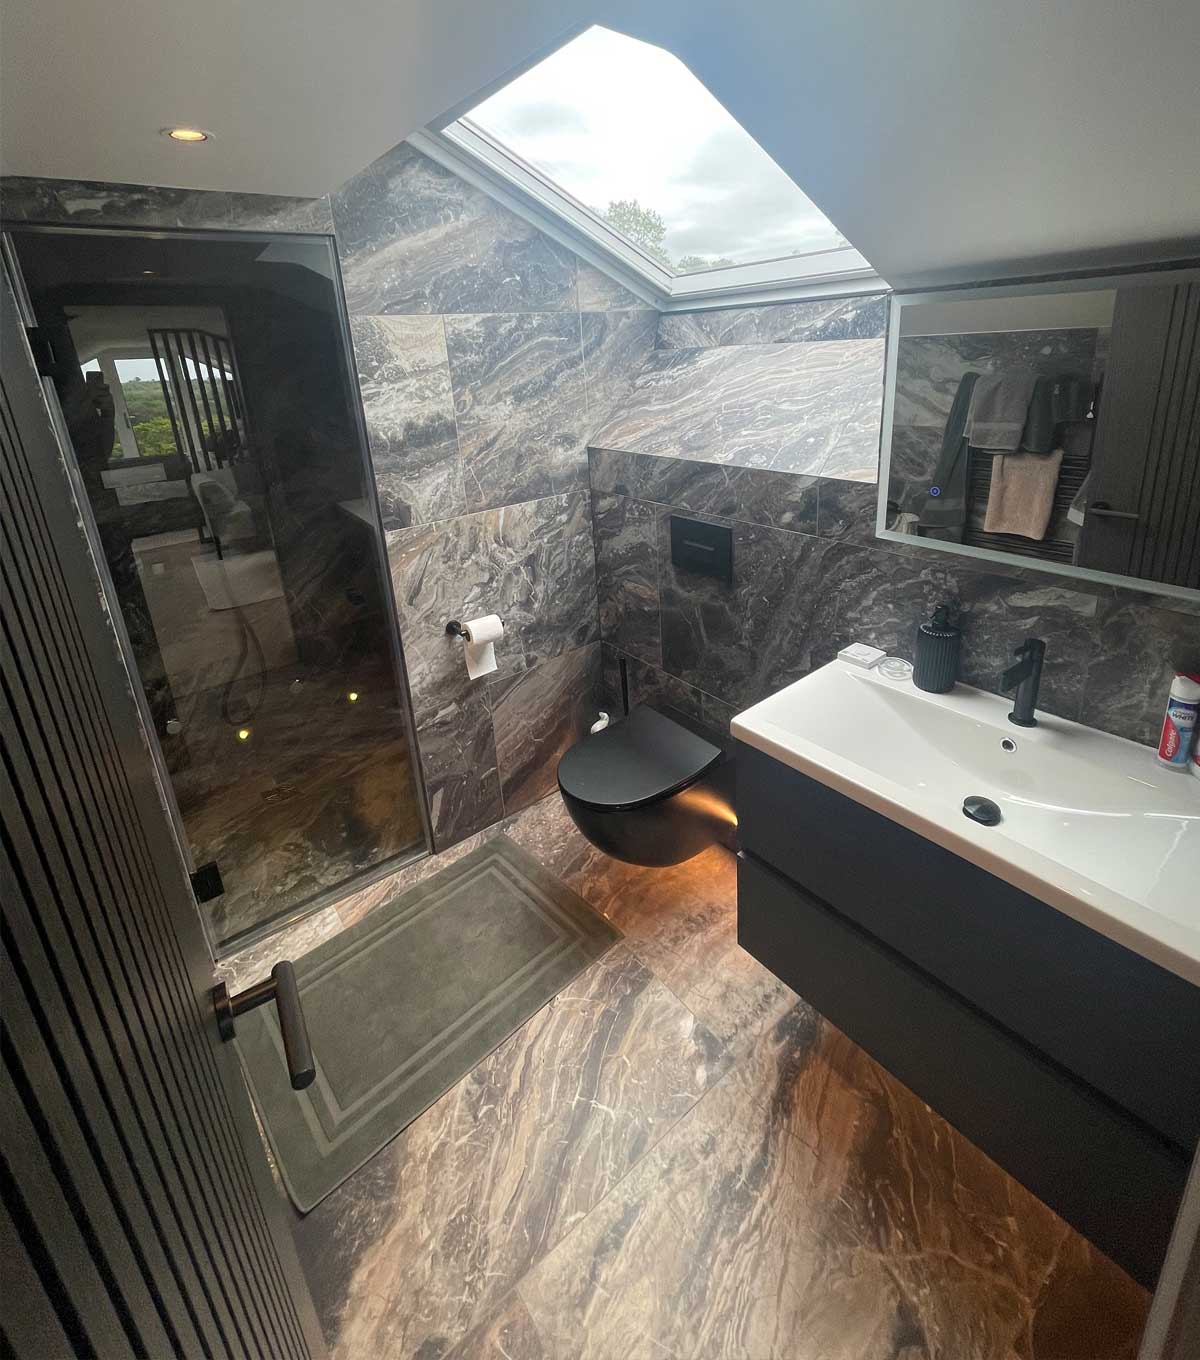 An ensuite bathroom and shower to a loft conversion bedroom installation built by topflite loft conversions in northwest england